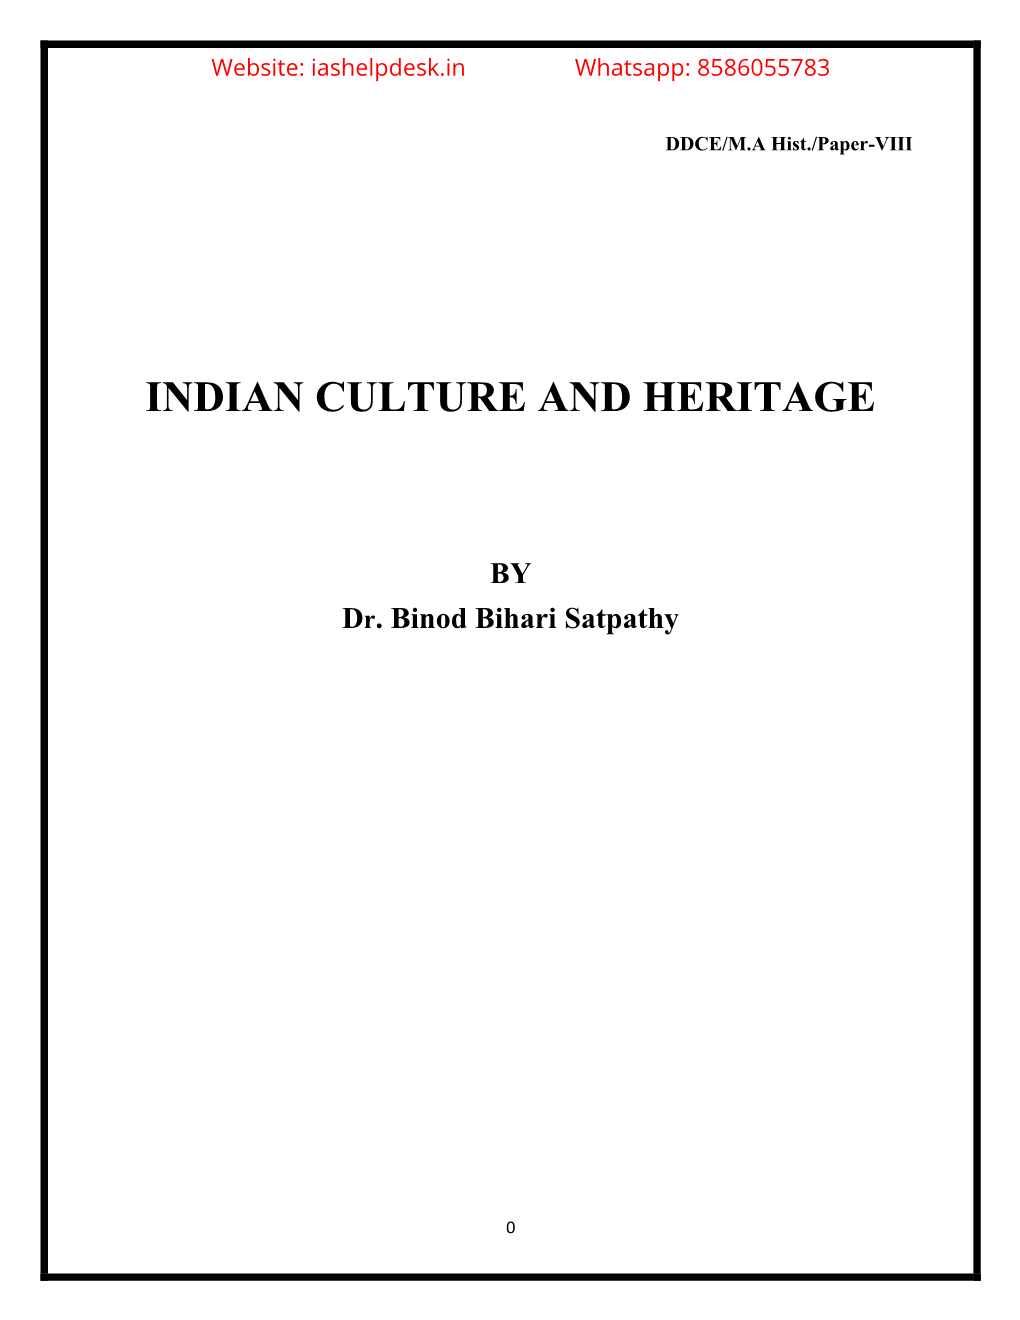 Indian Culture and Heritage